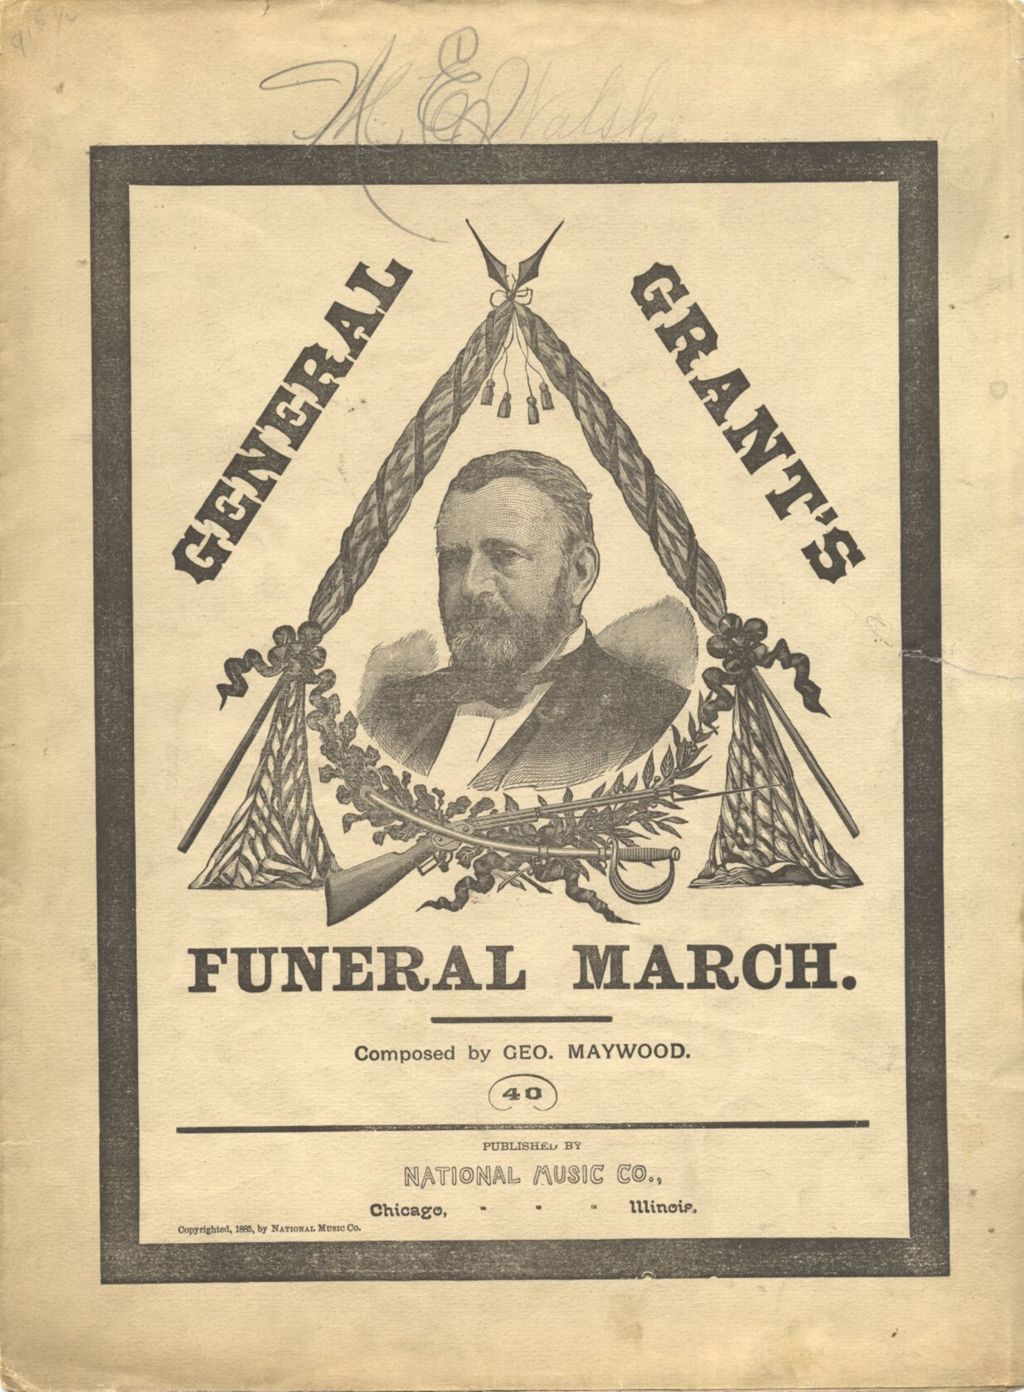 General Grant's Funeral March